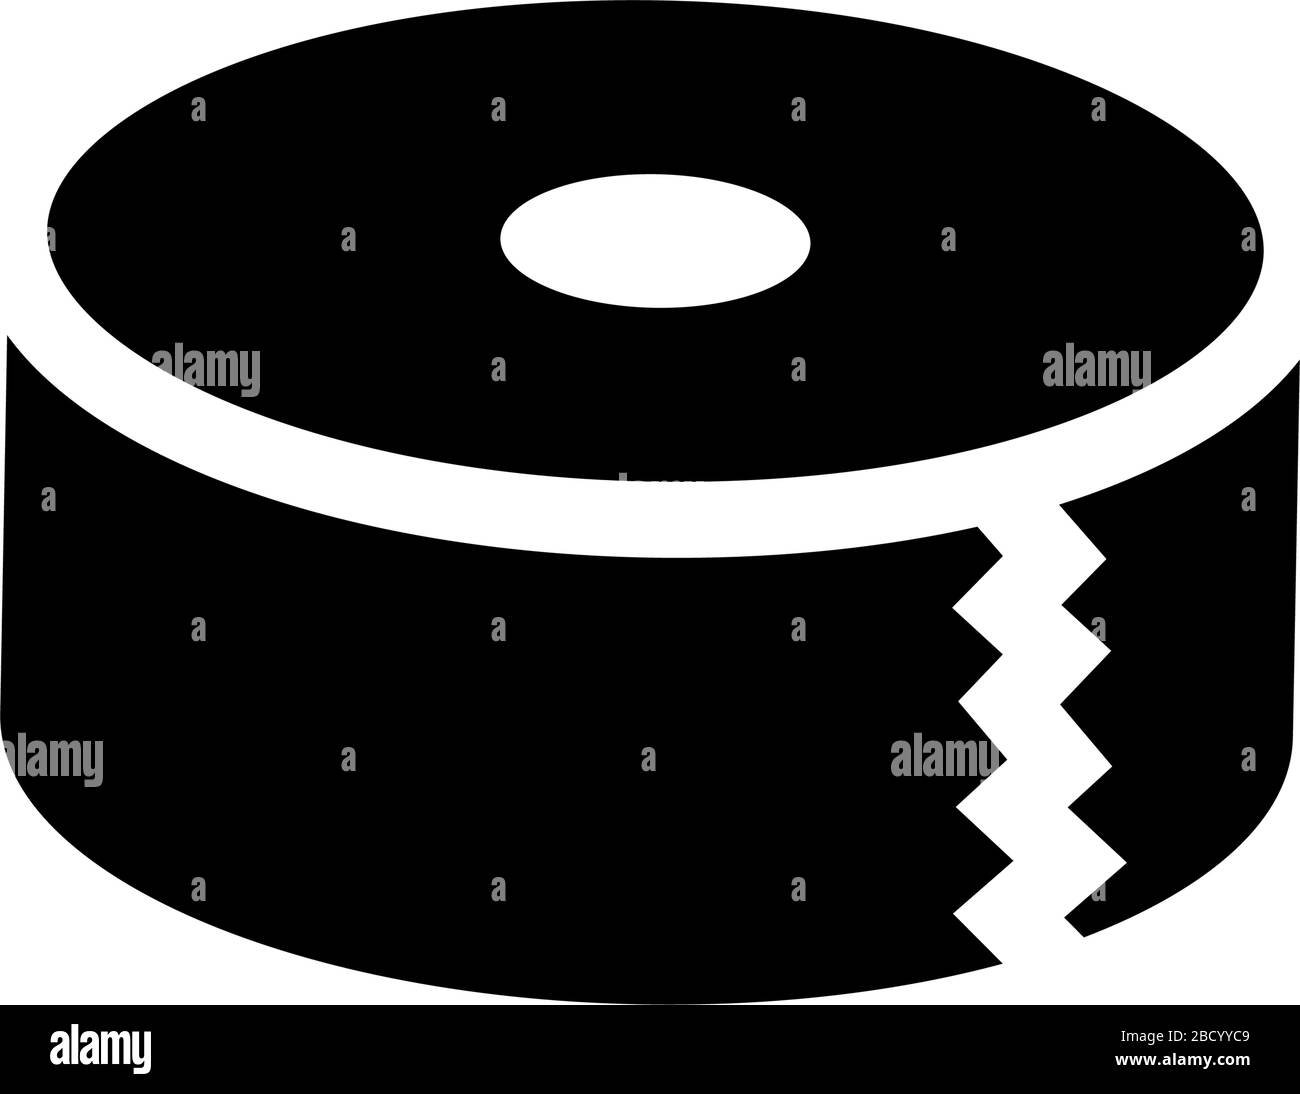 Duct tape, gaffer tape, packing tape vector icon illustration Stock Vector